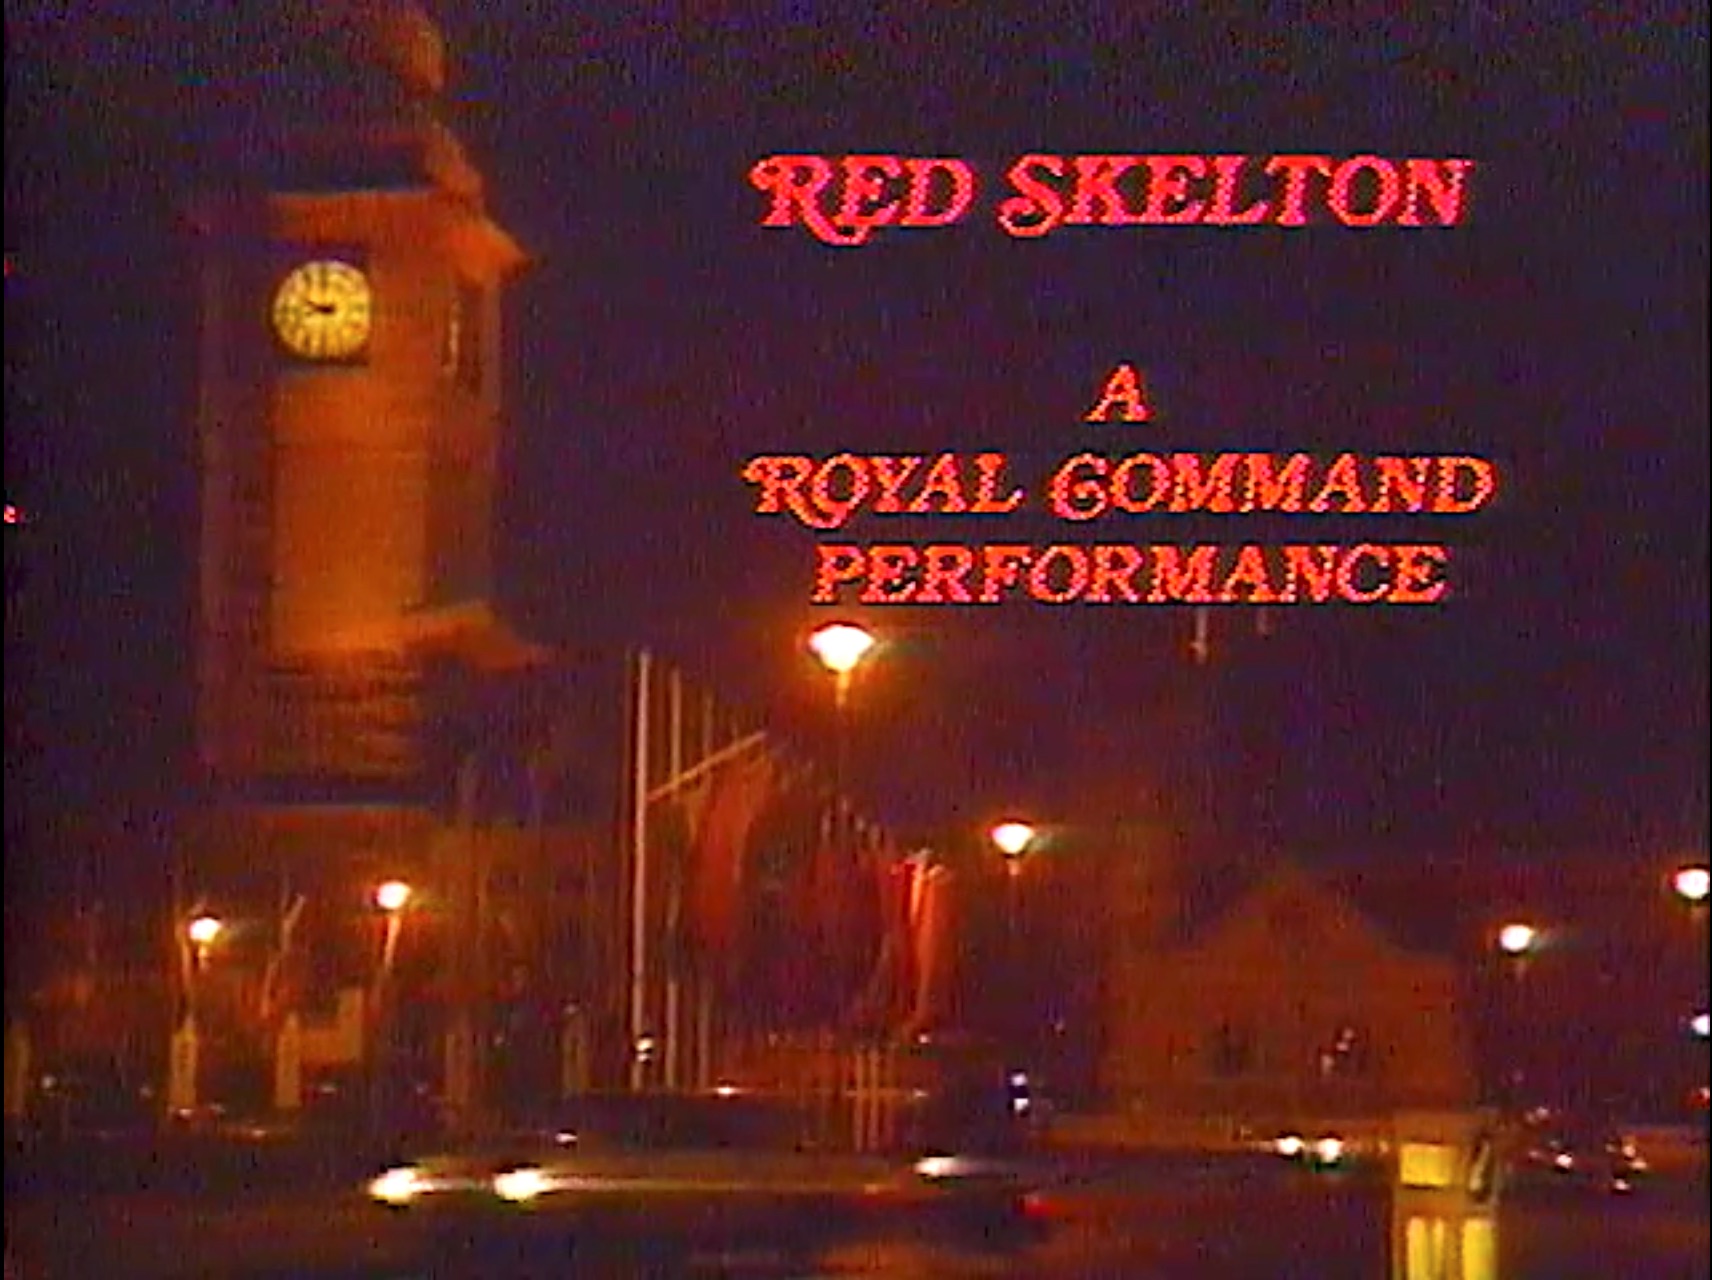 A Royal Command Performance